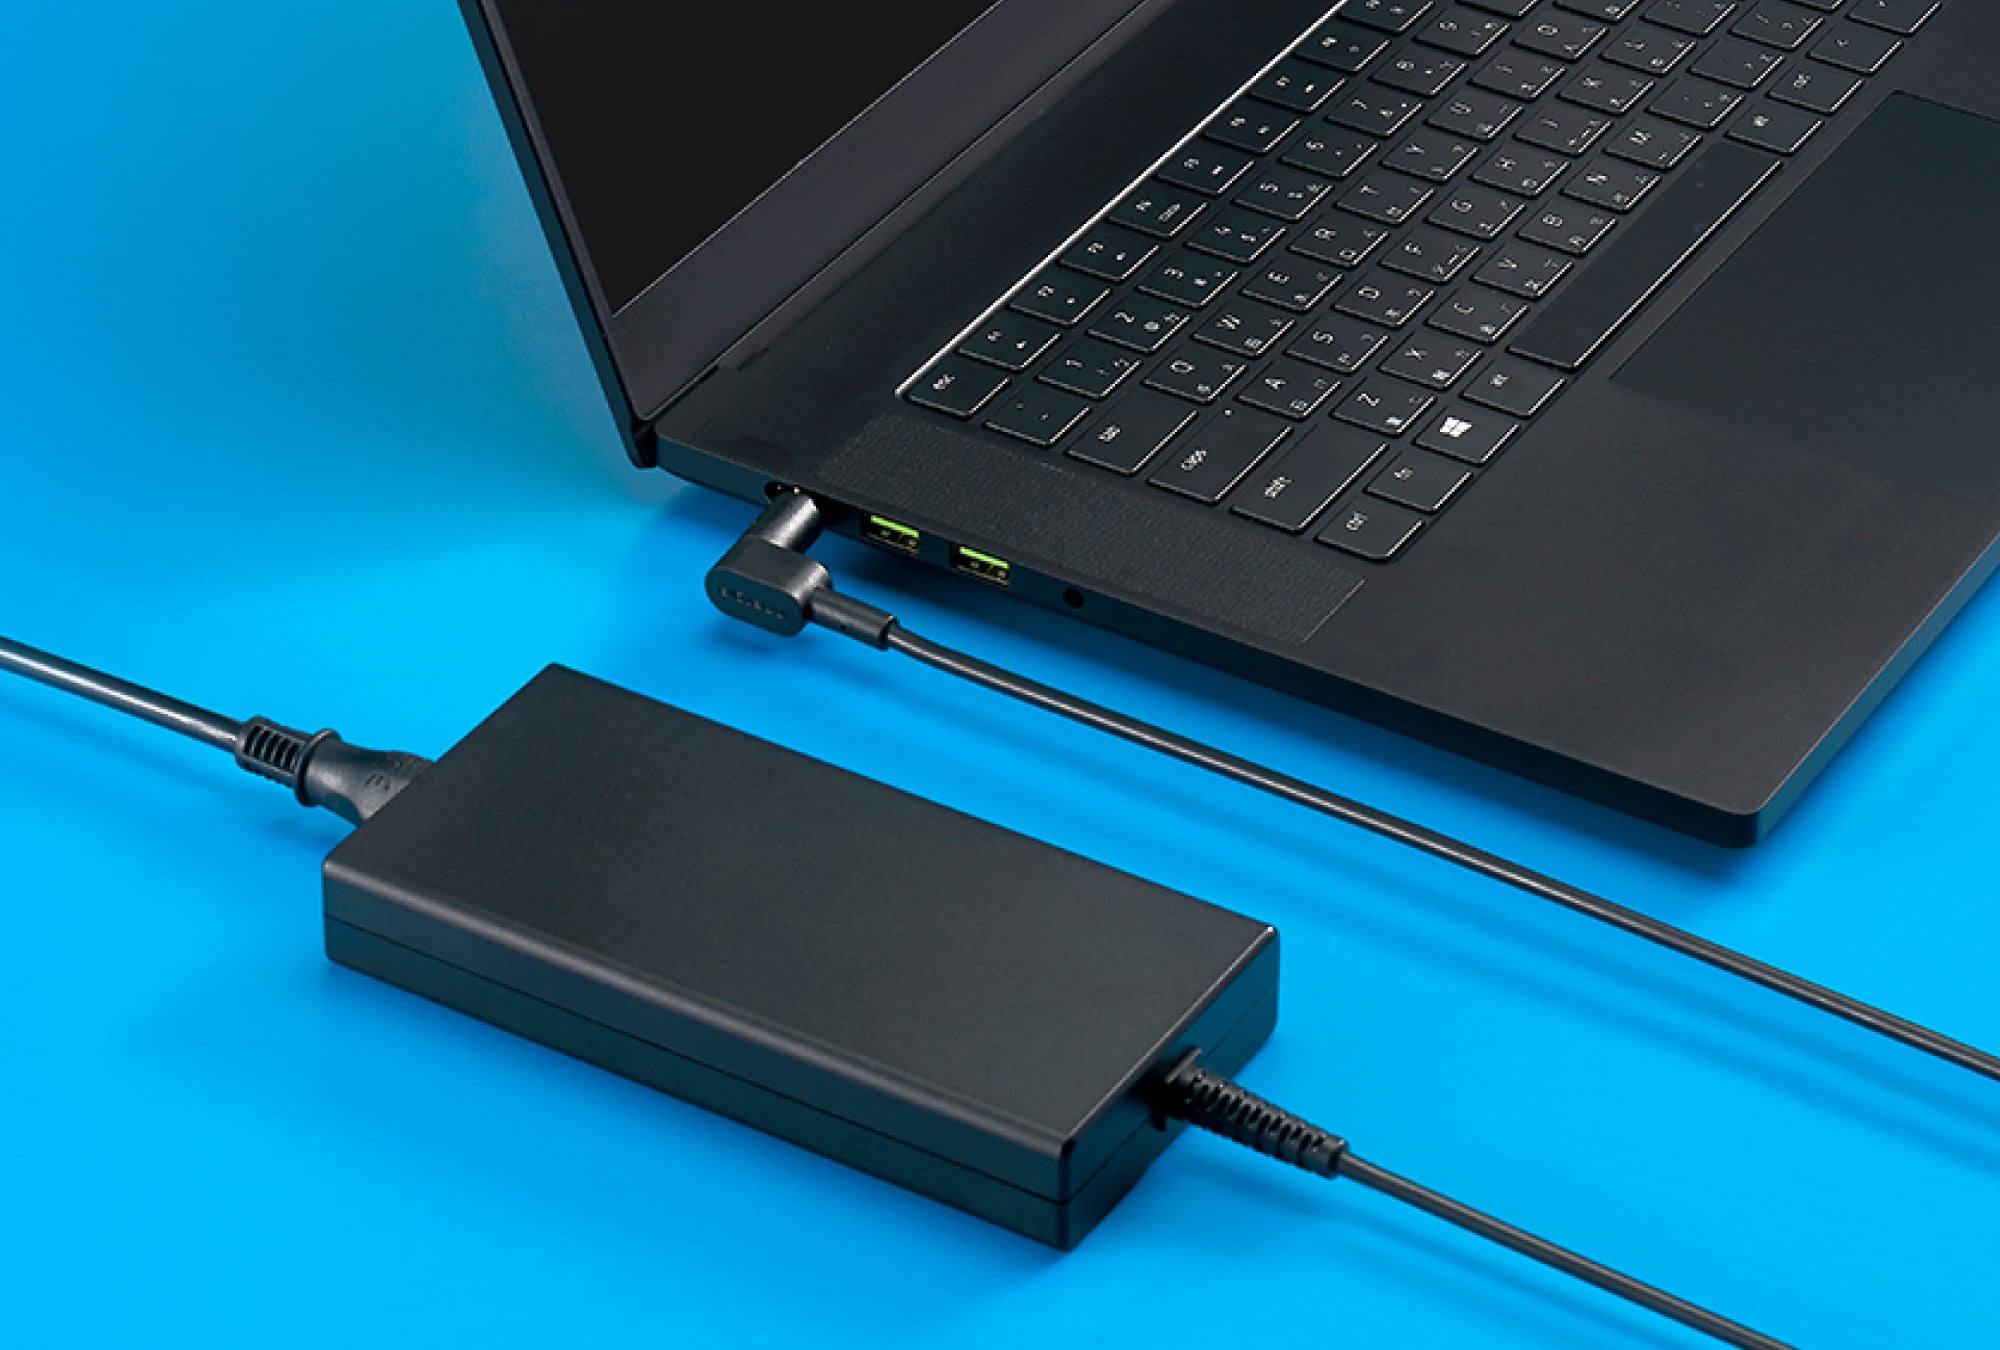 adapter wattage affects how much energy your laptop consumes